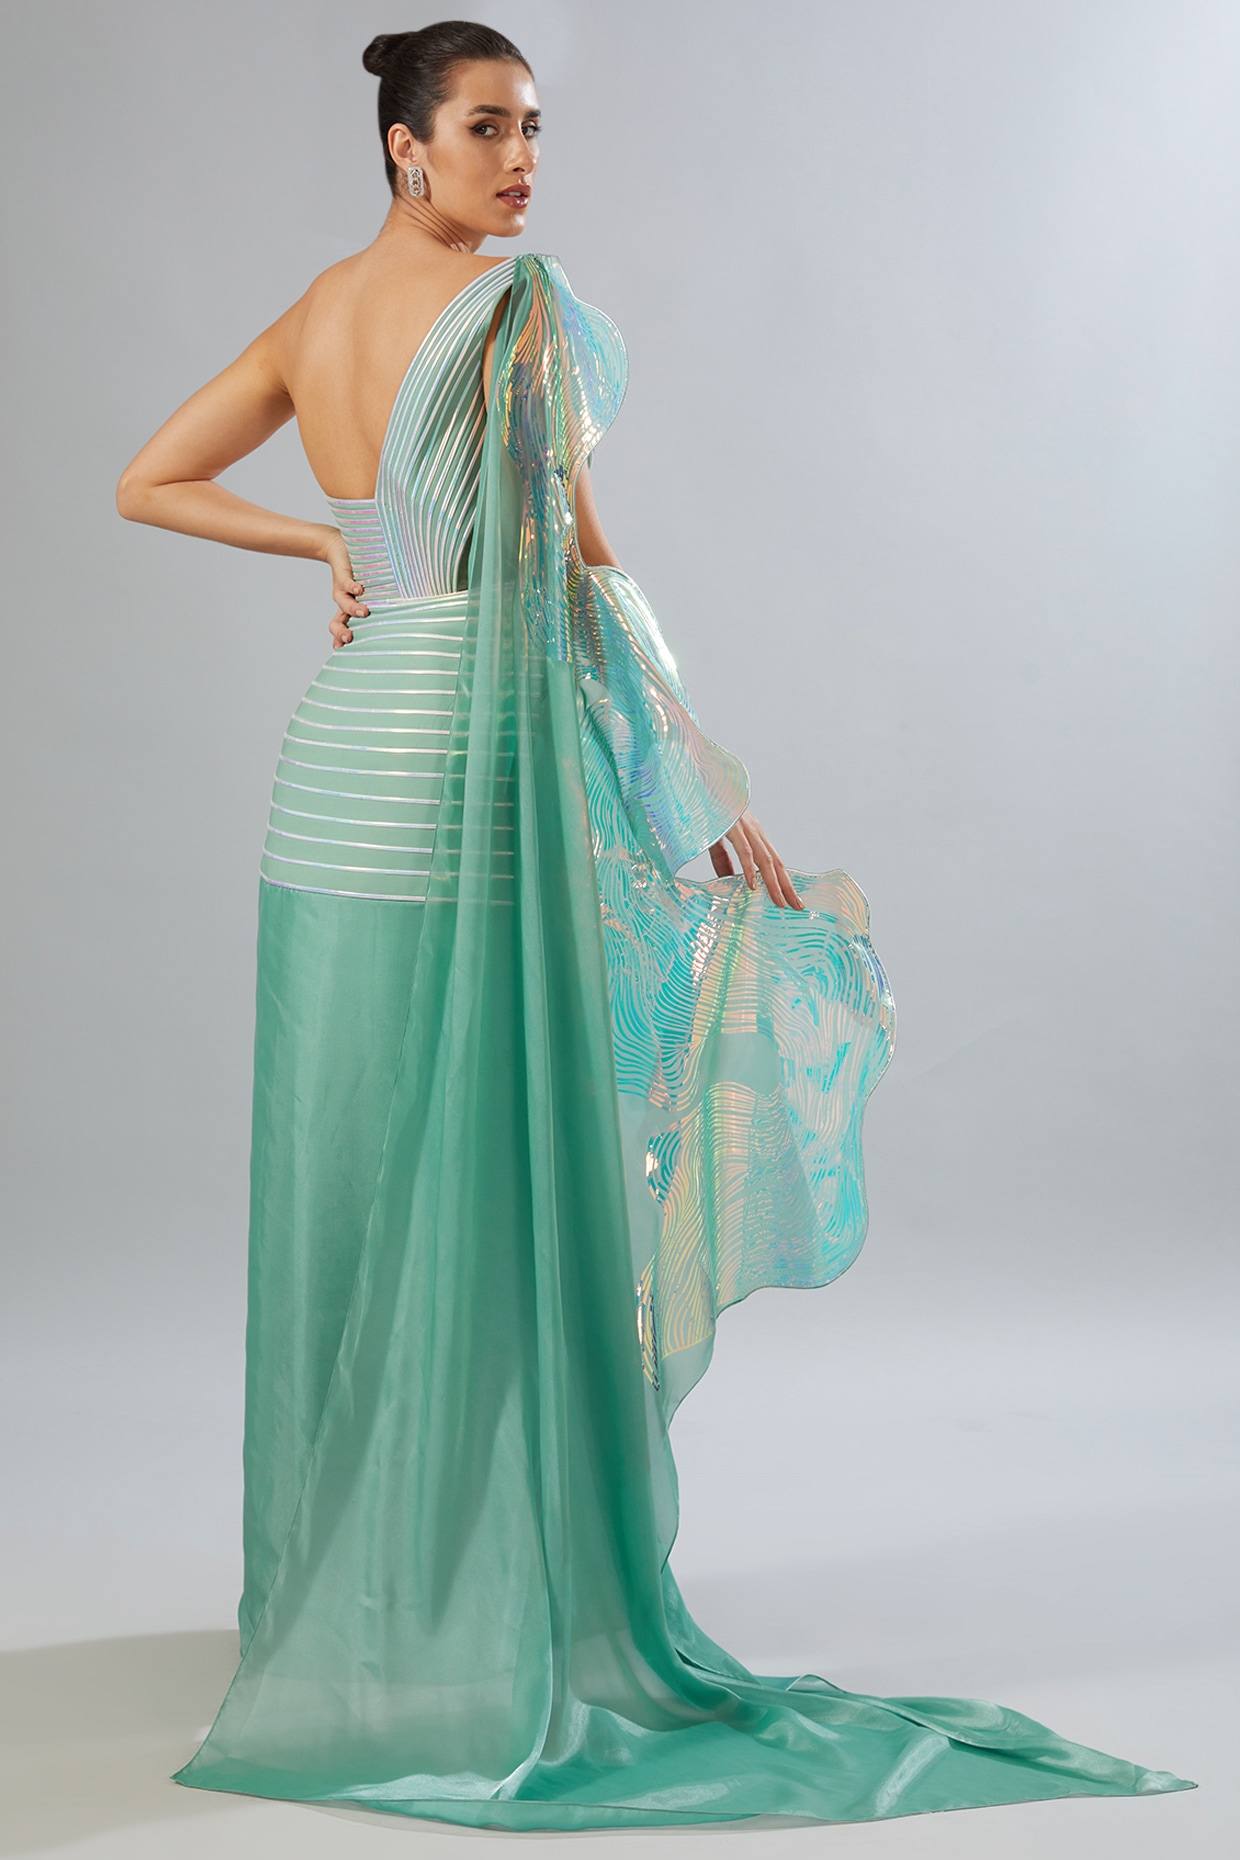 Buy Emerald Metallic Draped Gown by Designer AMIT AGGARWAL Online at  Ogaan.com